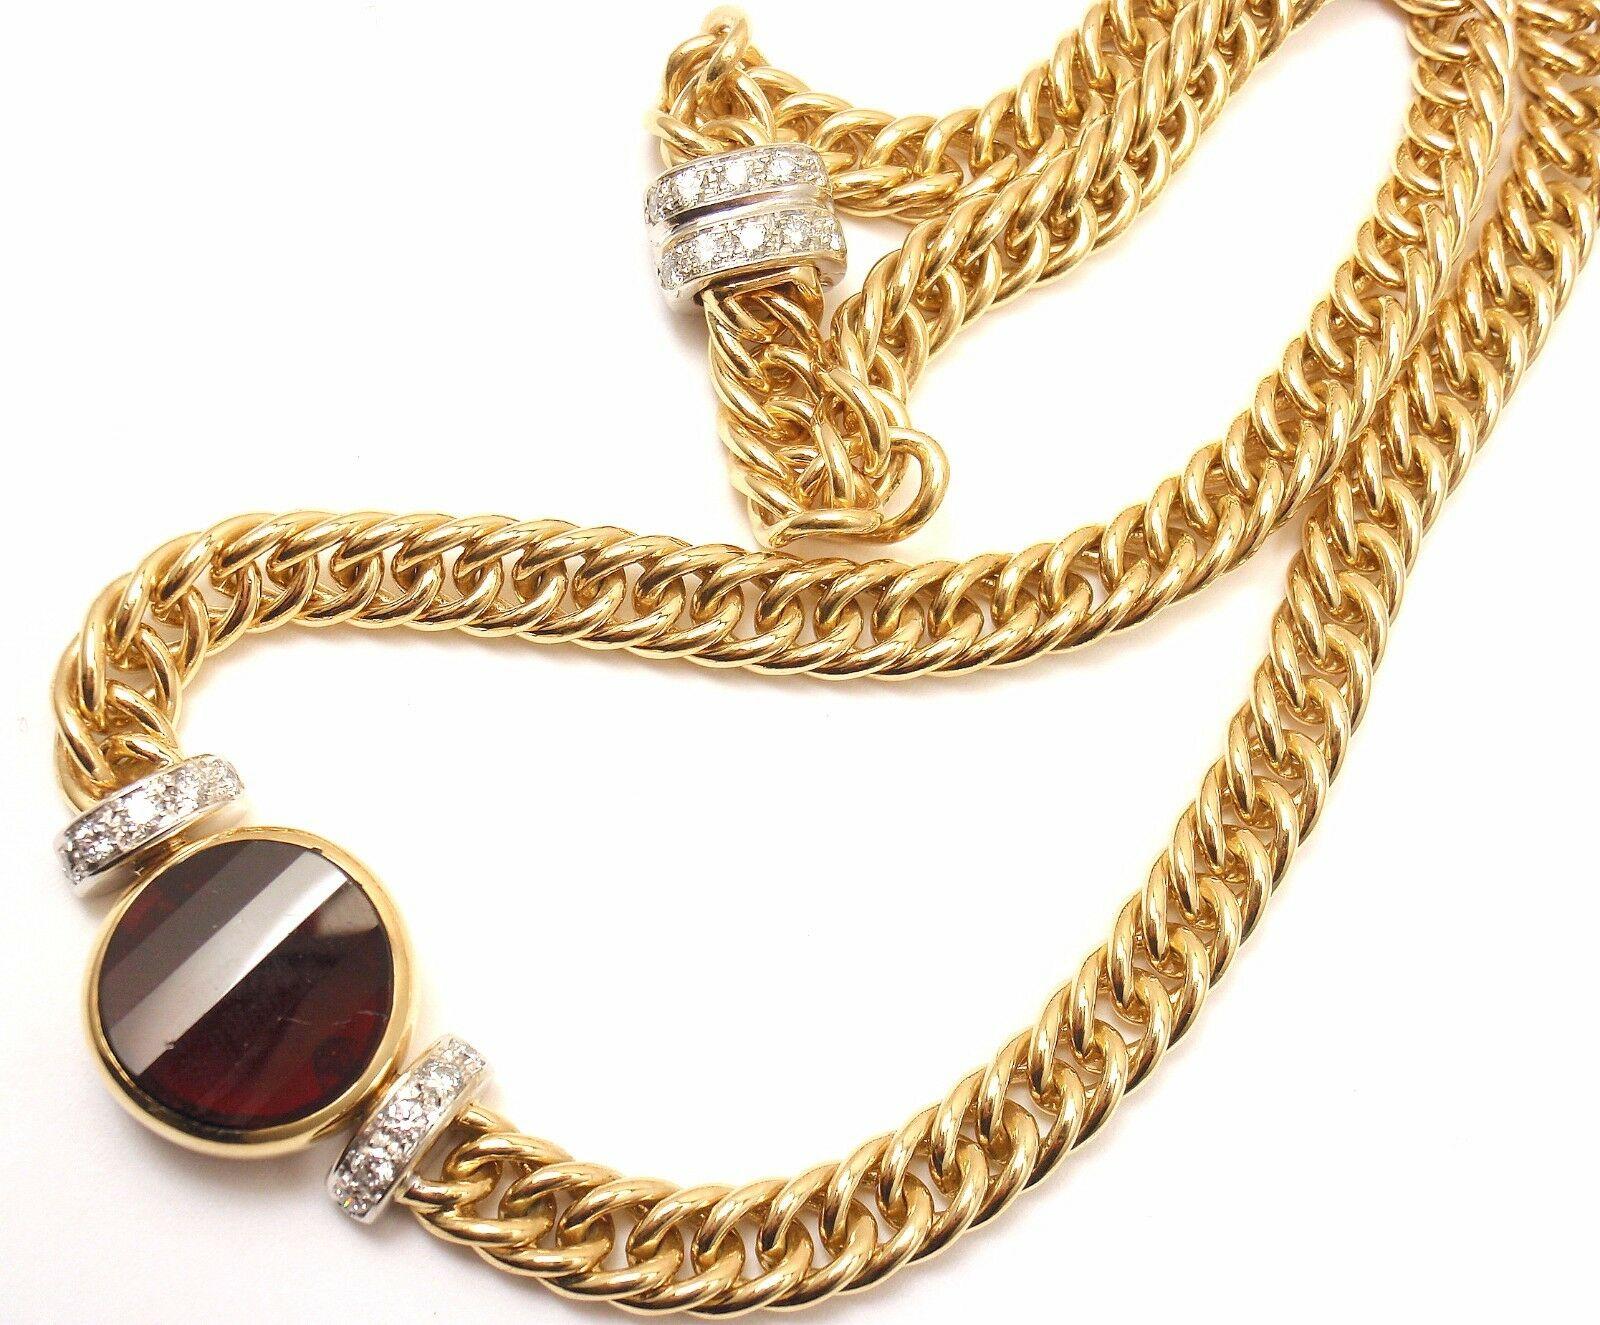 18k Yellow + White Gold Garnet Pendant Link Necklace by Pomellato. 

With 1 garnet 15mm x 15mm
20 round brilliant cut diamonds VS1 clarity, G color
total weight approx. .60-1 ctw

Details: 
Weight: 70.0 grams
Chain - Length: 16